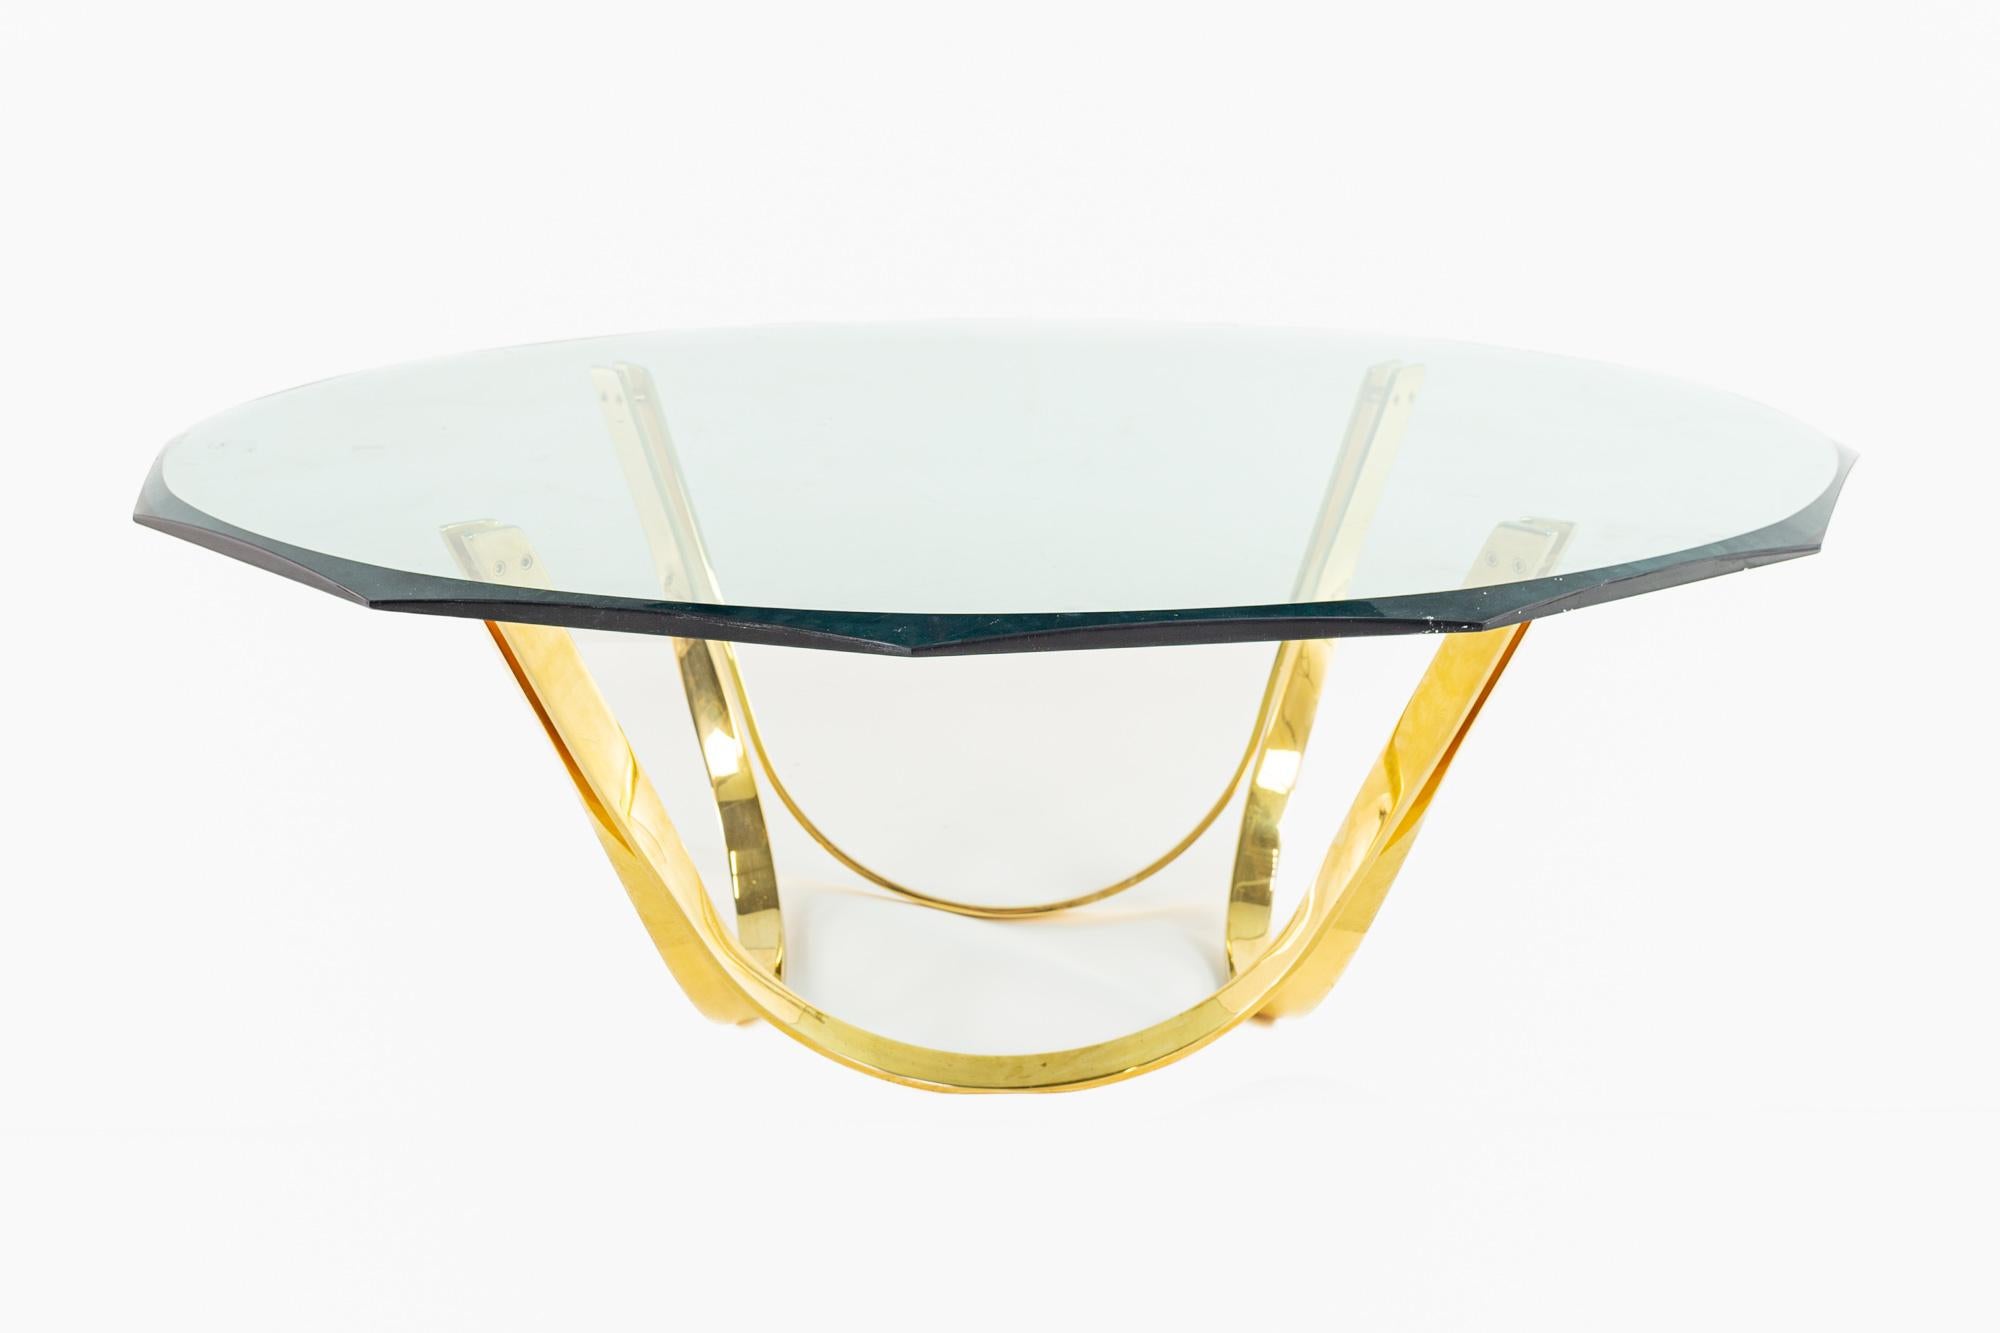 Roger Sprunger Mid Century Glass and Brass Table

This table measures: 48.5 wide x 48.5 deep x 18 inches high

All pieces of furniture can be had in what we call restored vintage condition. That means the piece is restored upon purchase so it’s